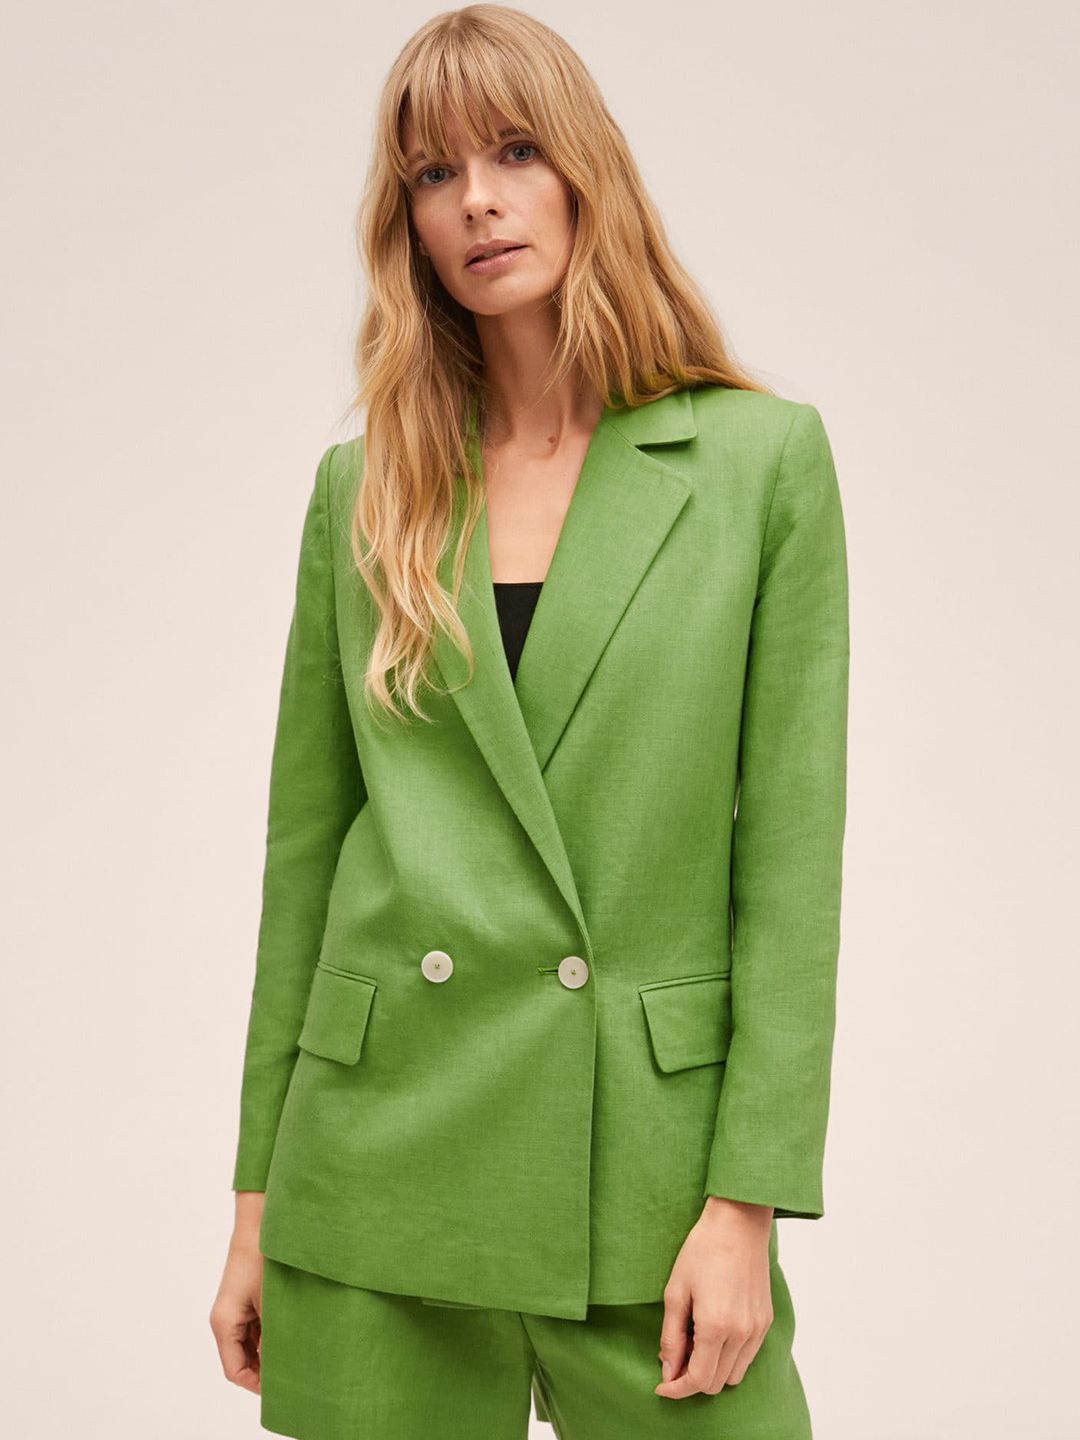 MANGO Women Green Solid Double-Breasted Blazer Price in India